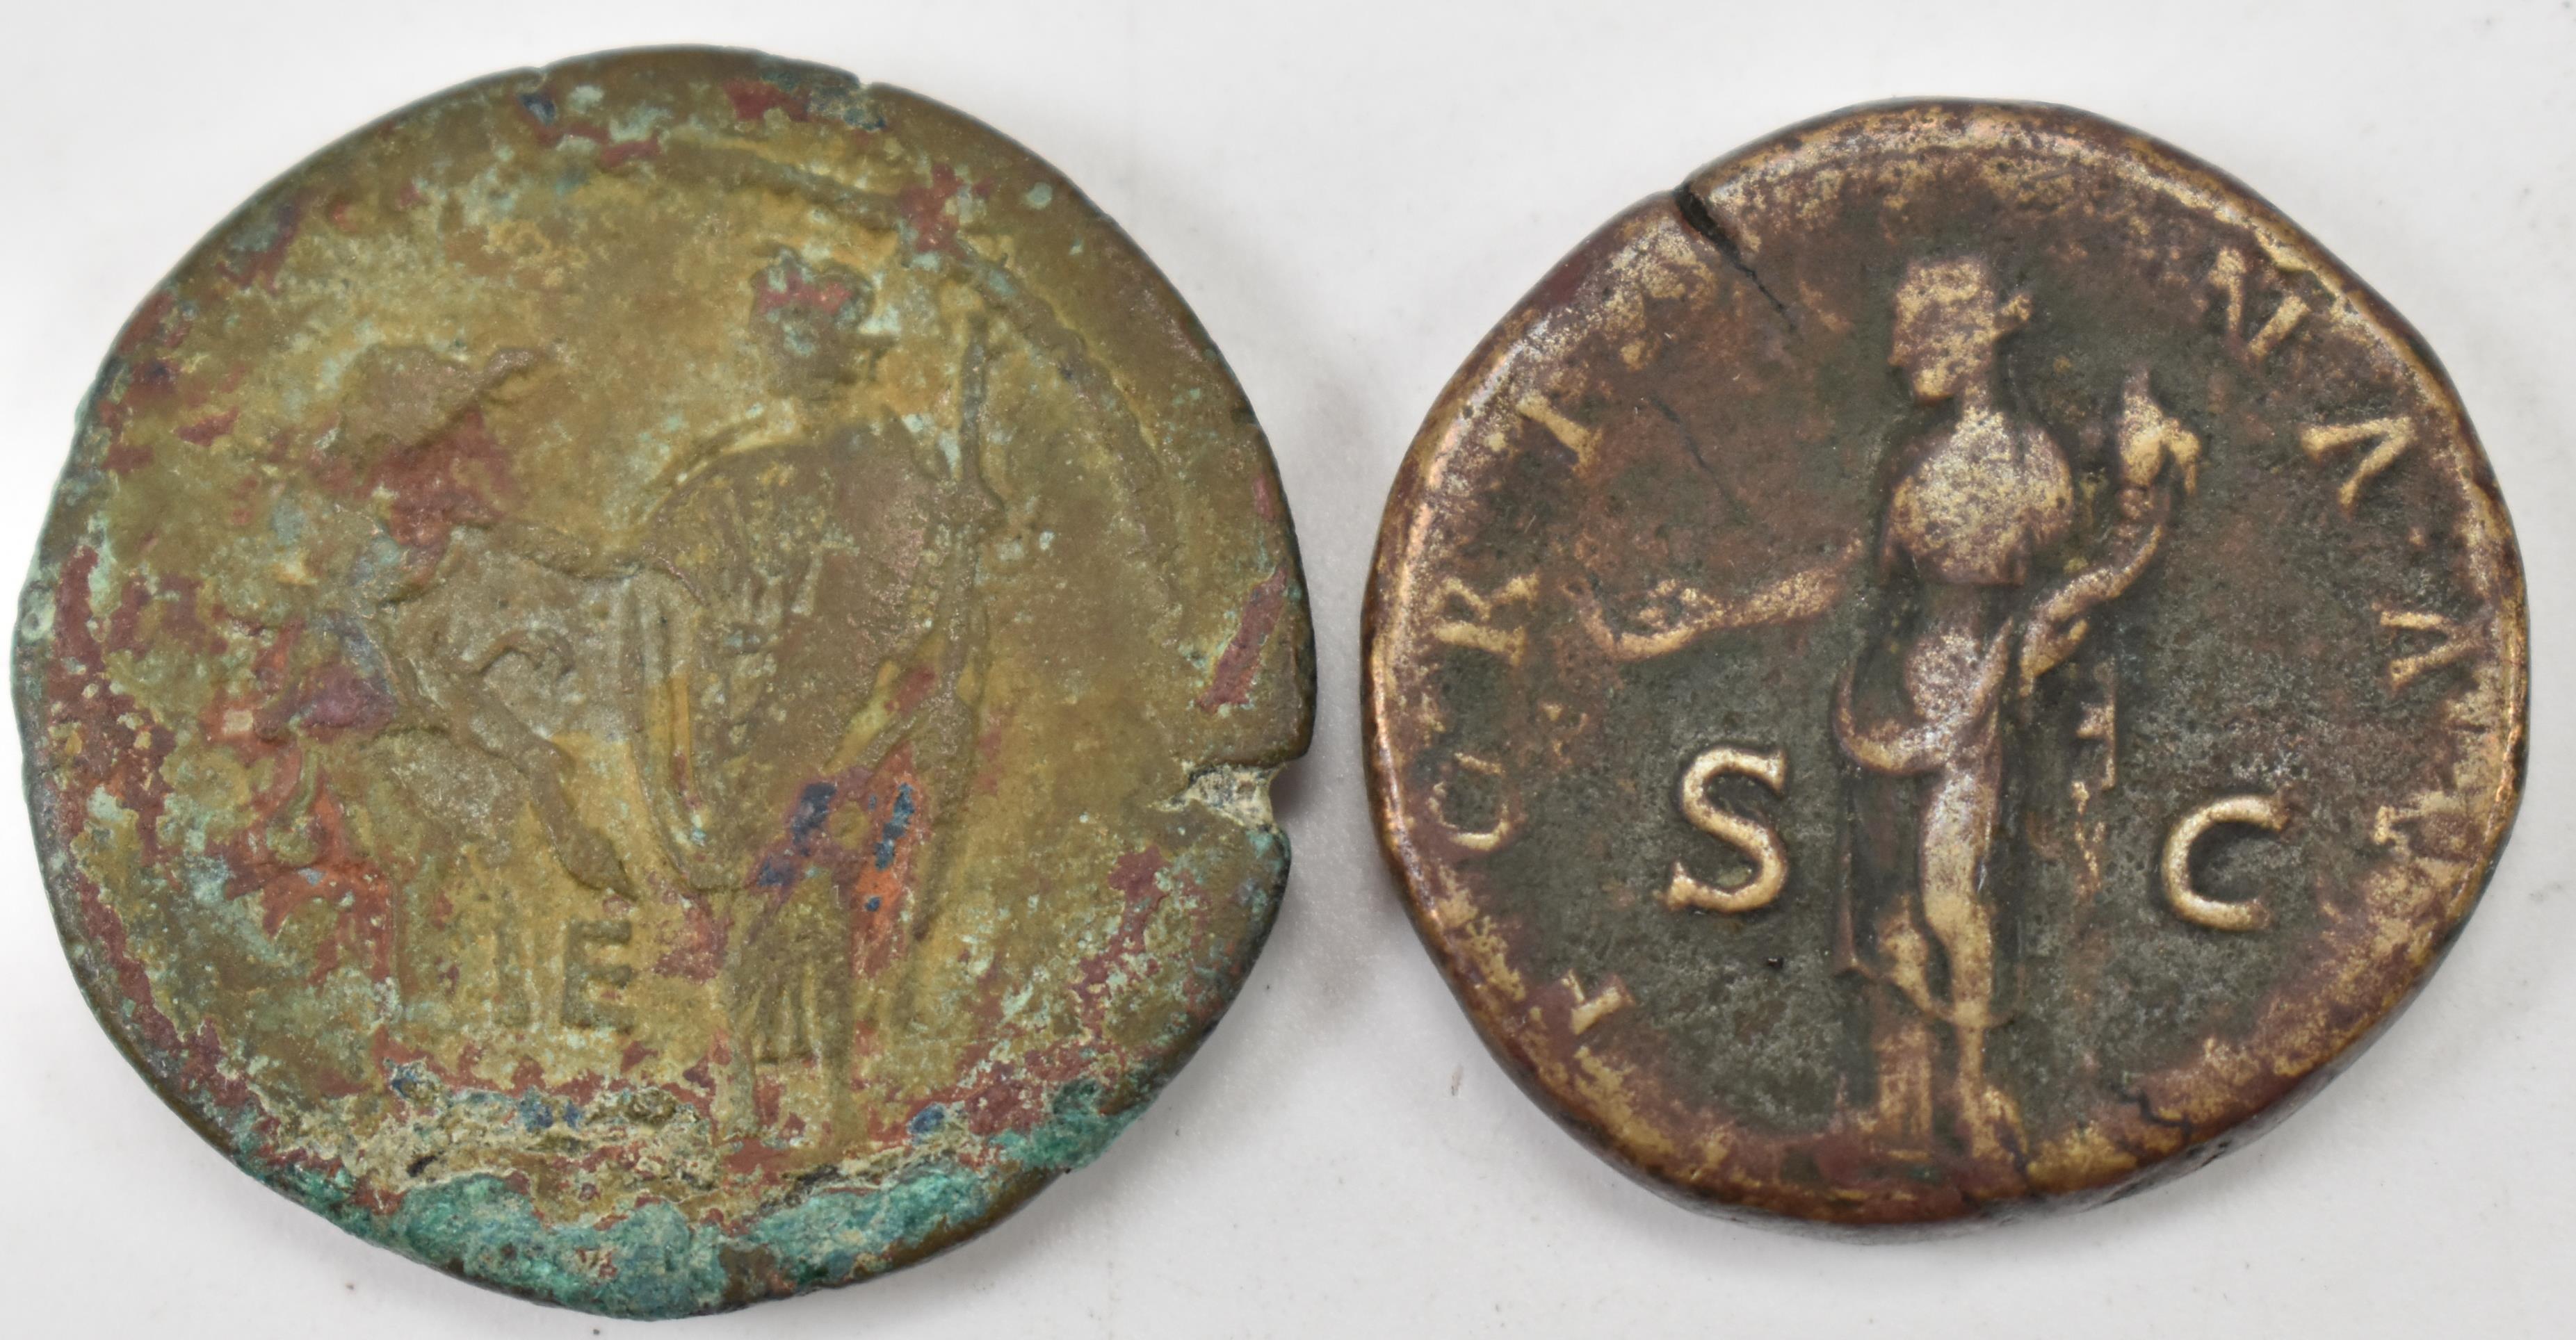 TWO ANCIENT ROMAN IMPERIAL COINS FROM THE REIGN OF HADRIAN - Image 2 of 2